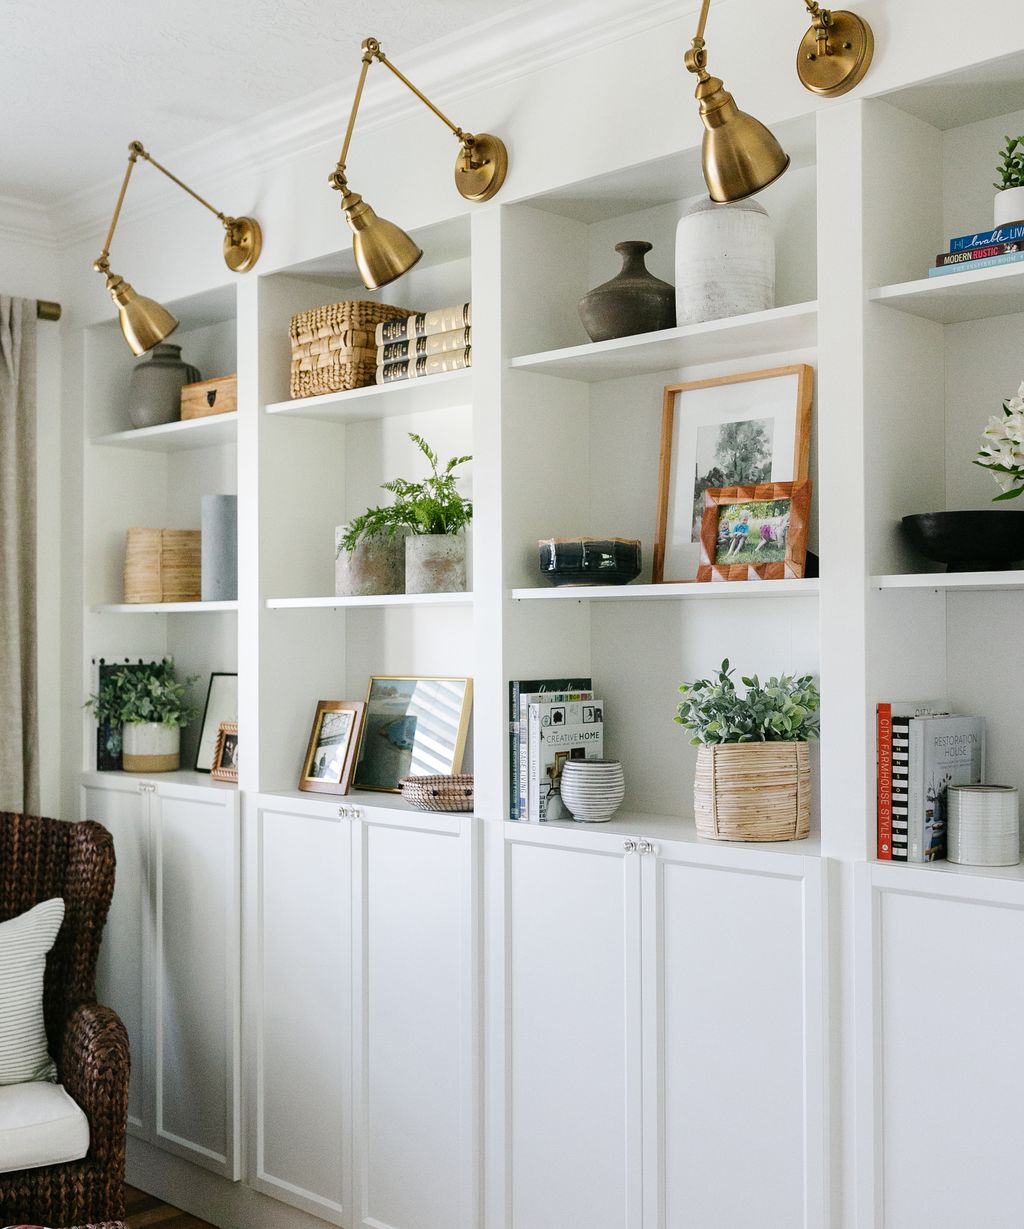 Before and after: This IKEA BILLY bookcase is now a bespoke built-in